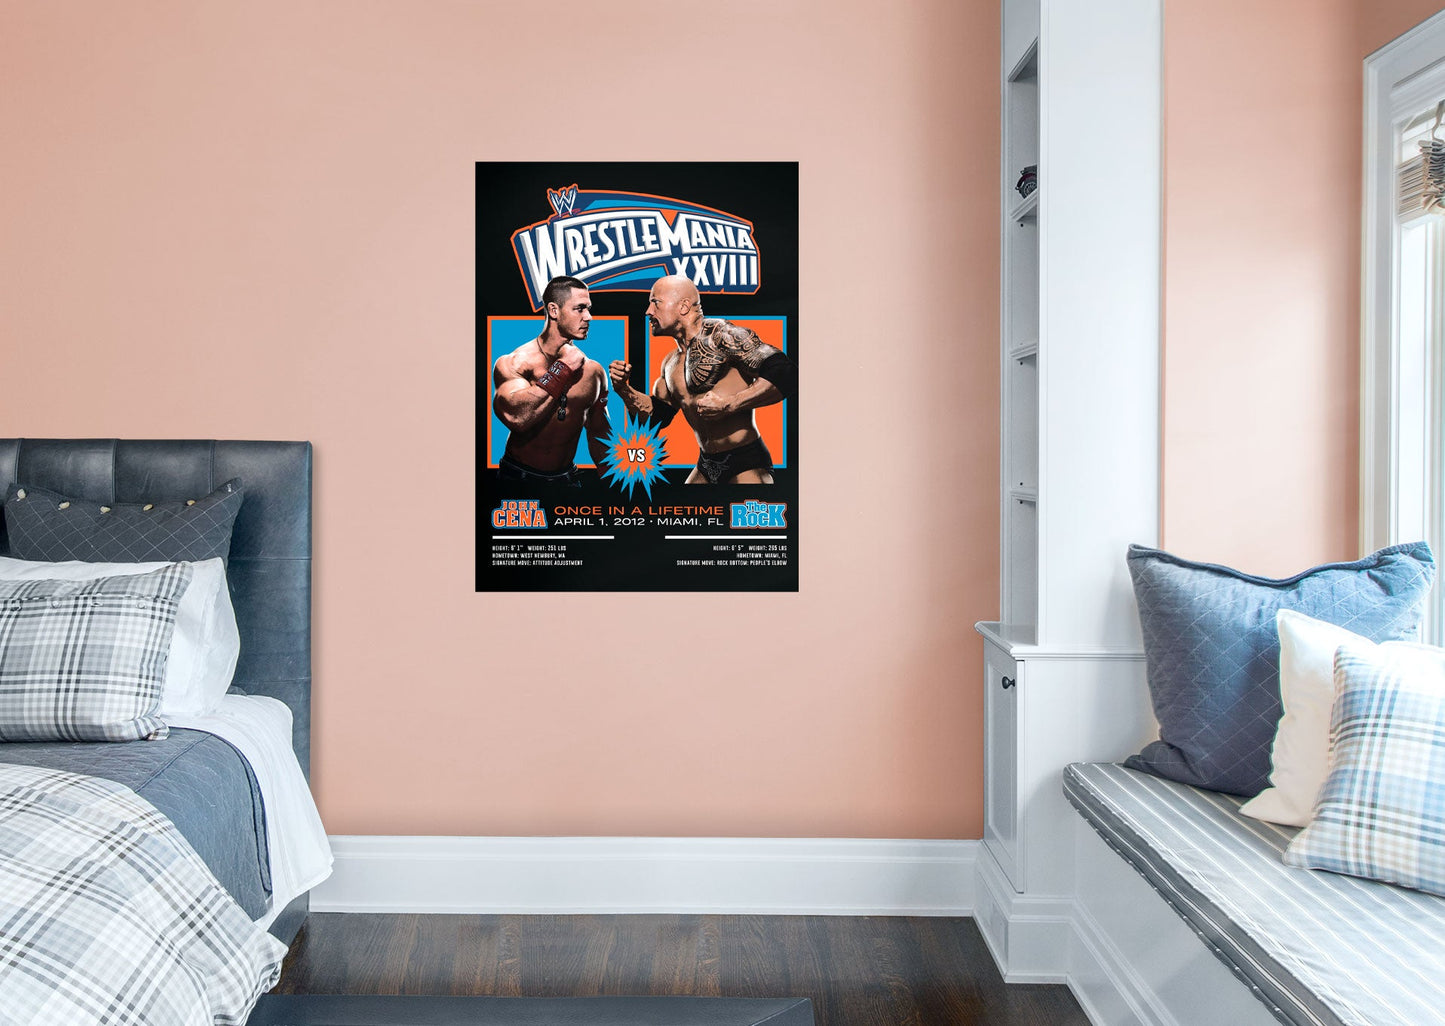 John Cena and The Rock Wrestlemania XXVIII Poster        - Officially Licensed WWE Removable Wall   Adhesive Decal